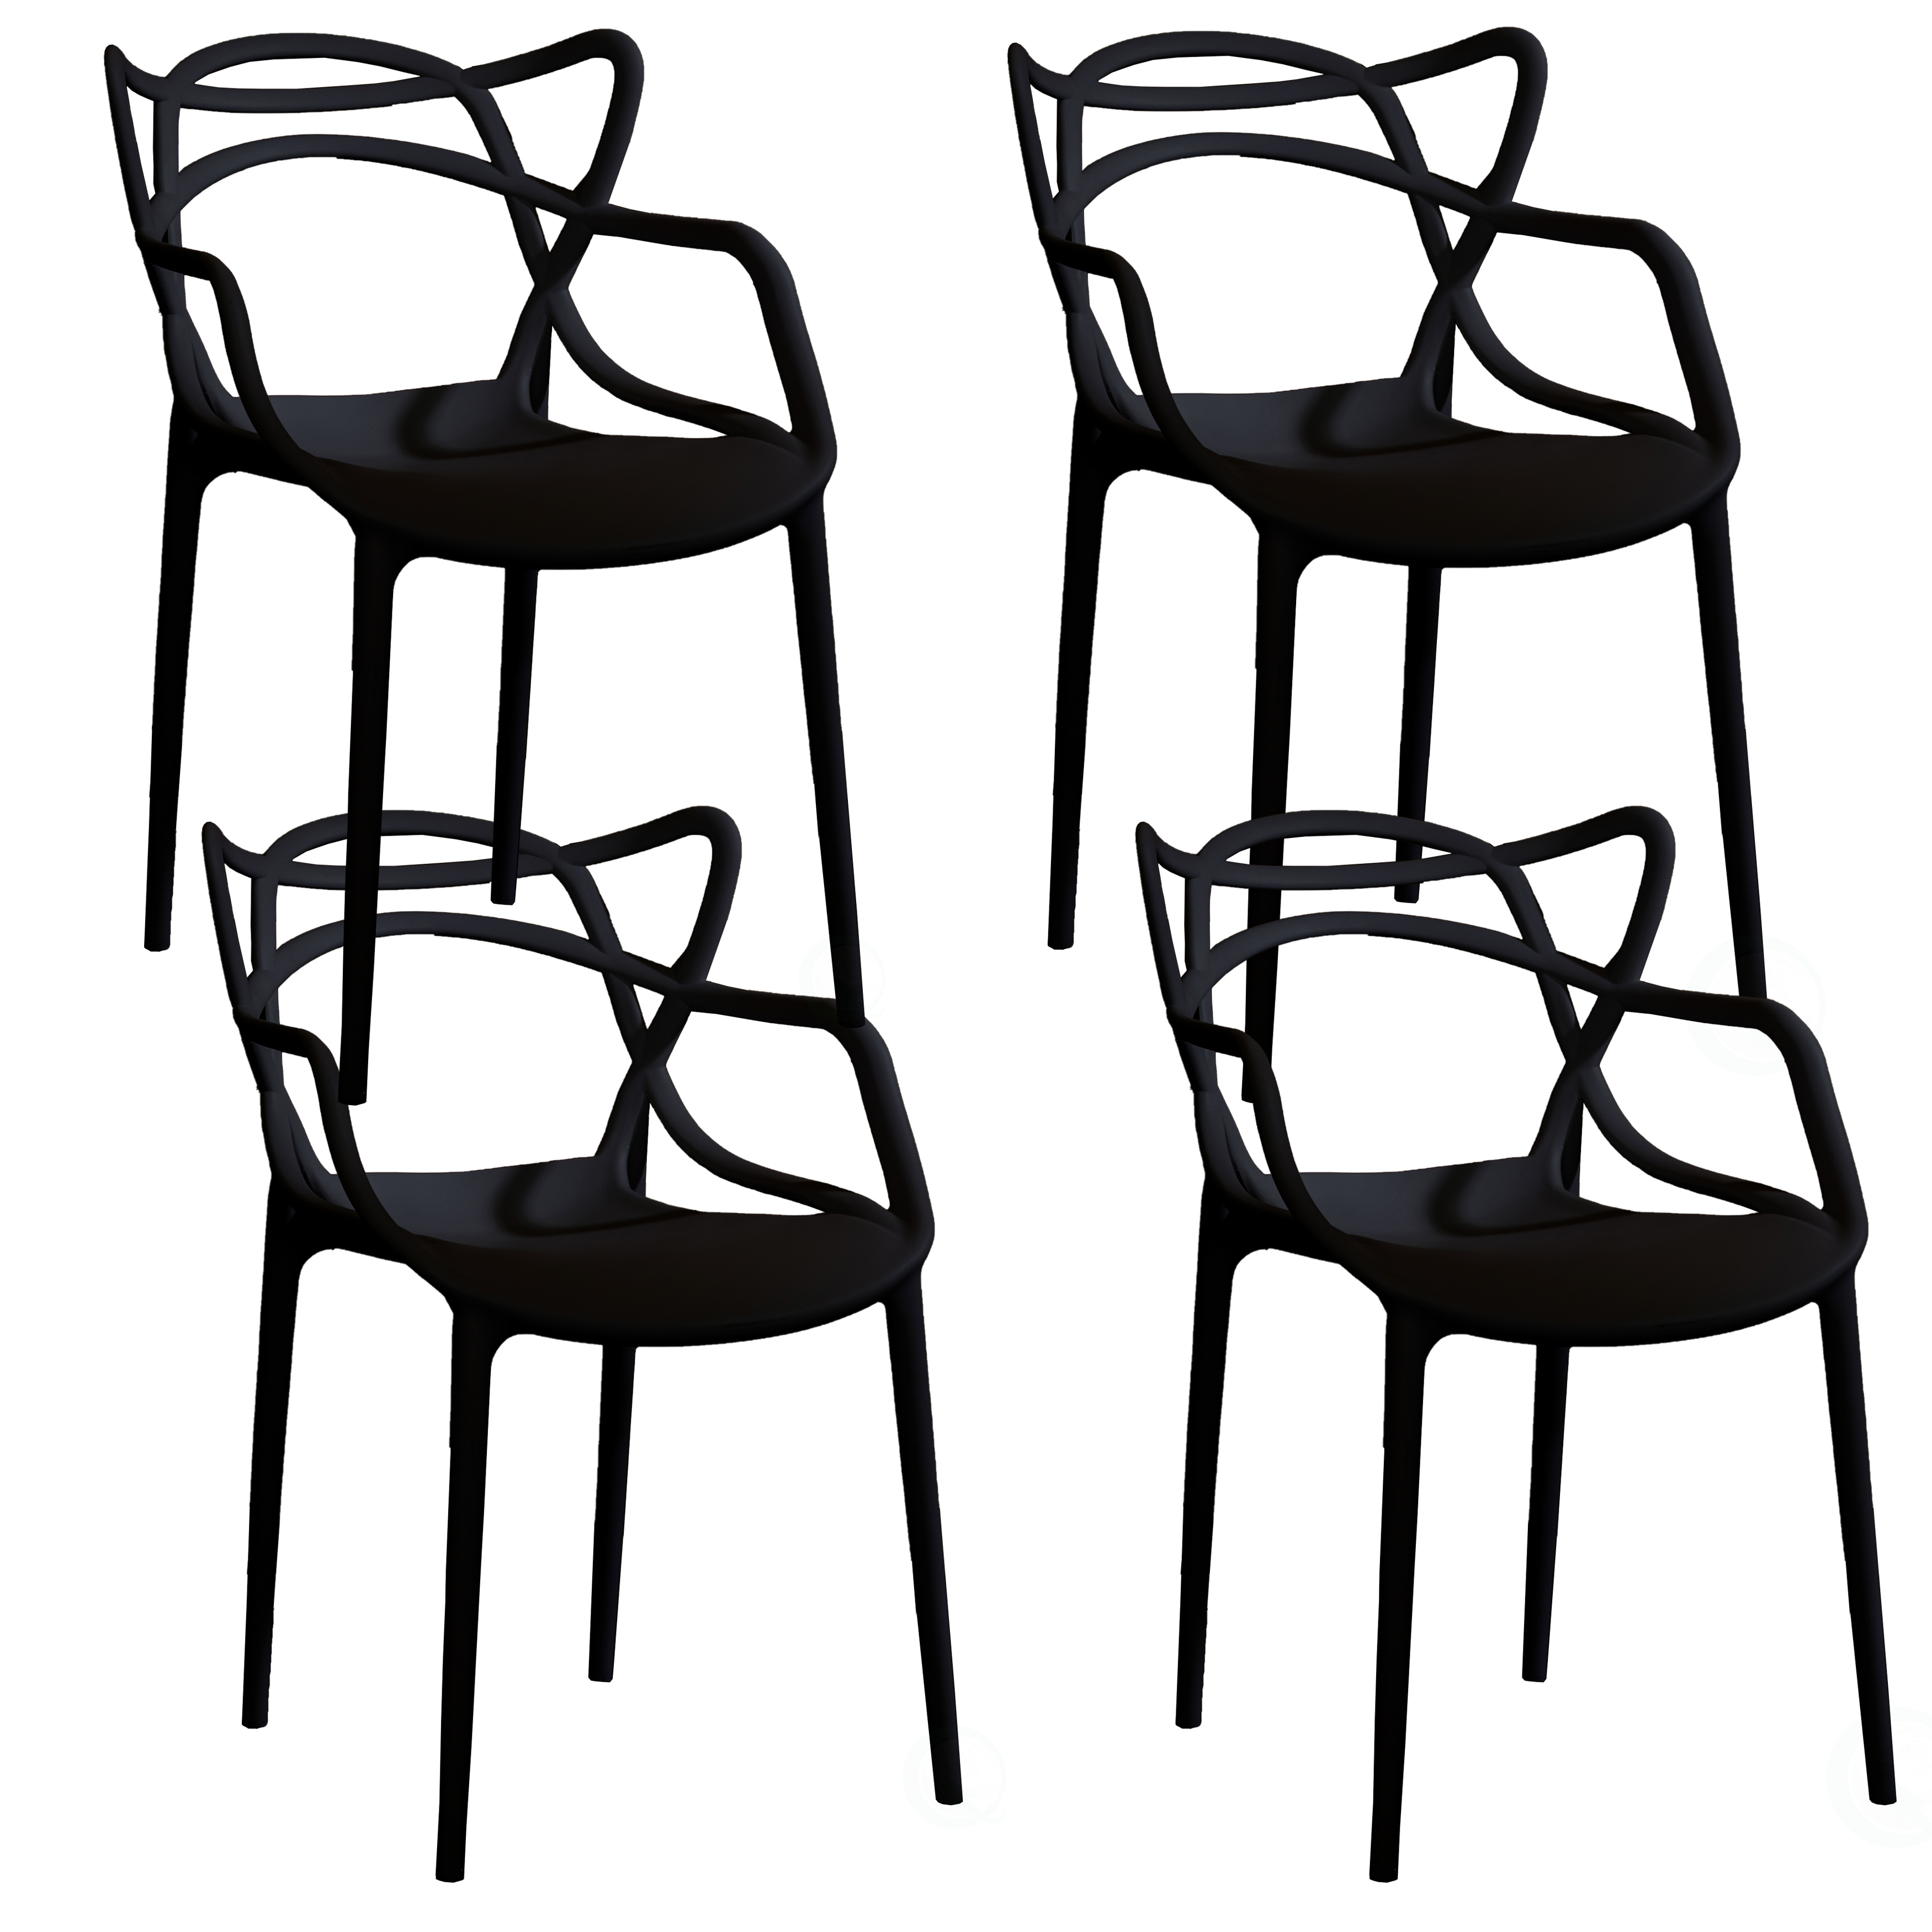 Mid-Century Modern Style Stackable Plastic Molded Arm Chair With Entangled Open Back - Black Set Of 4